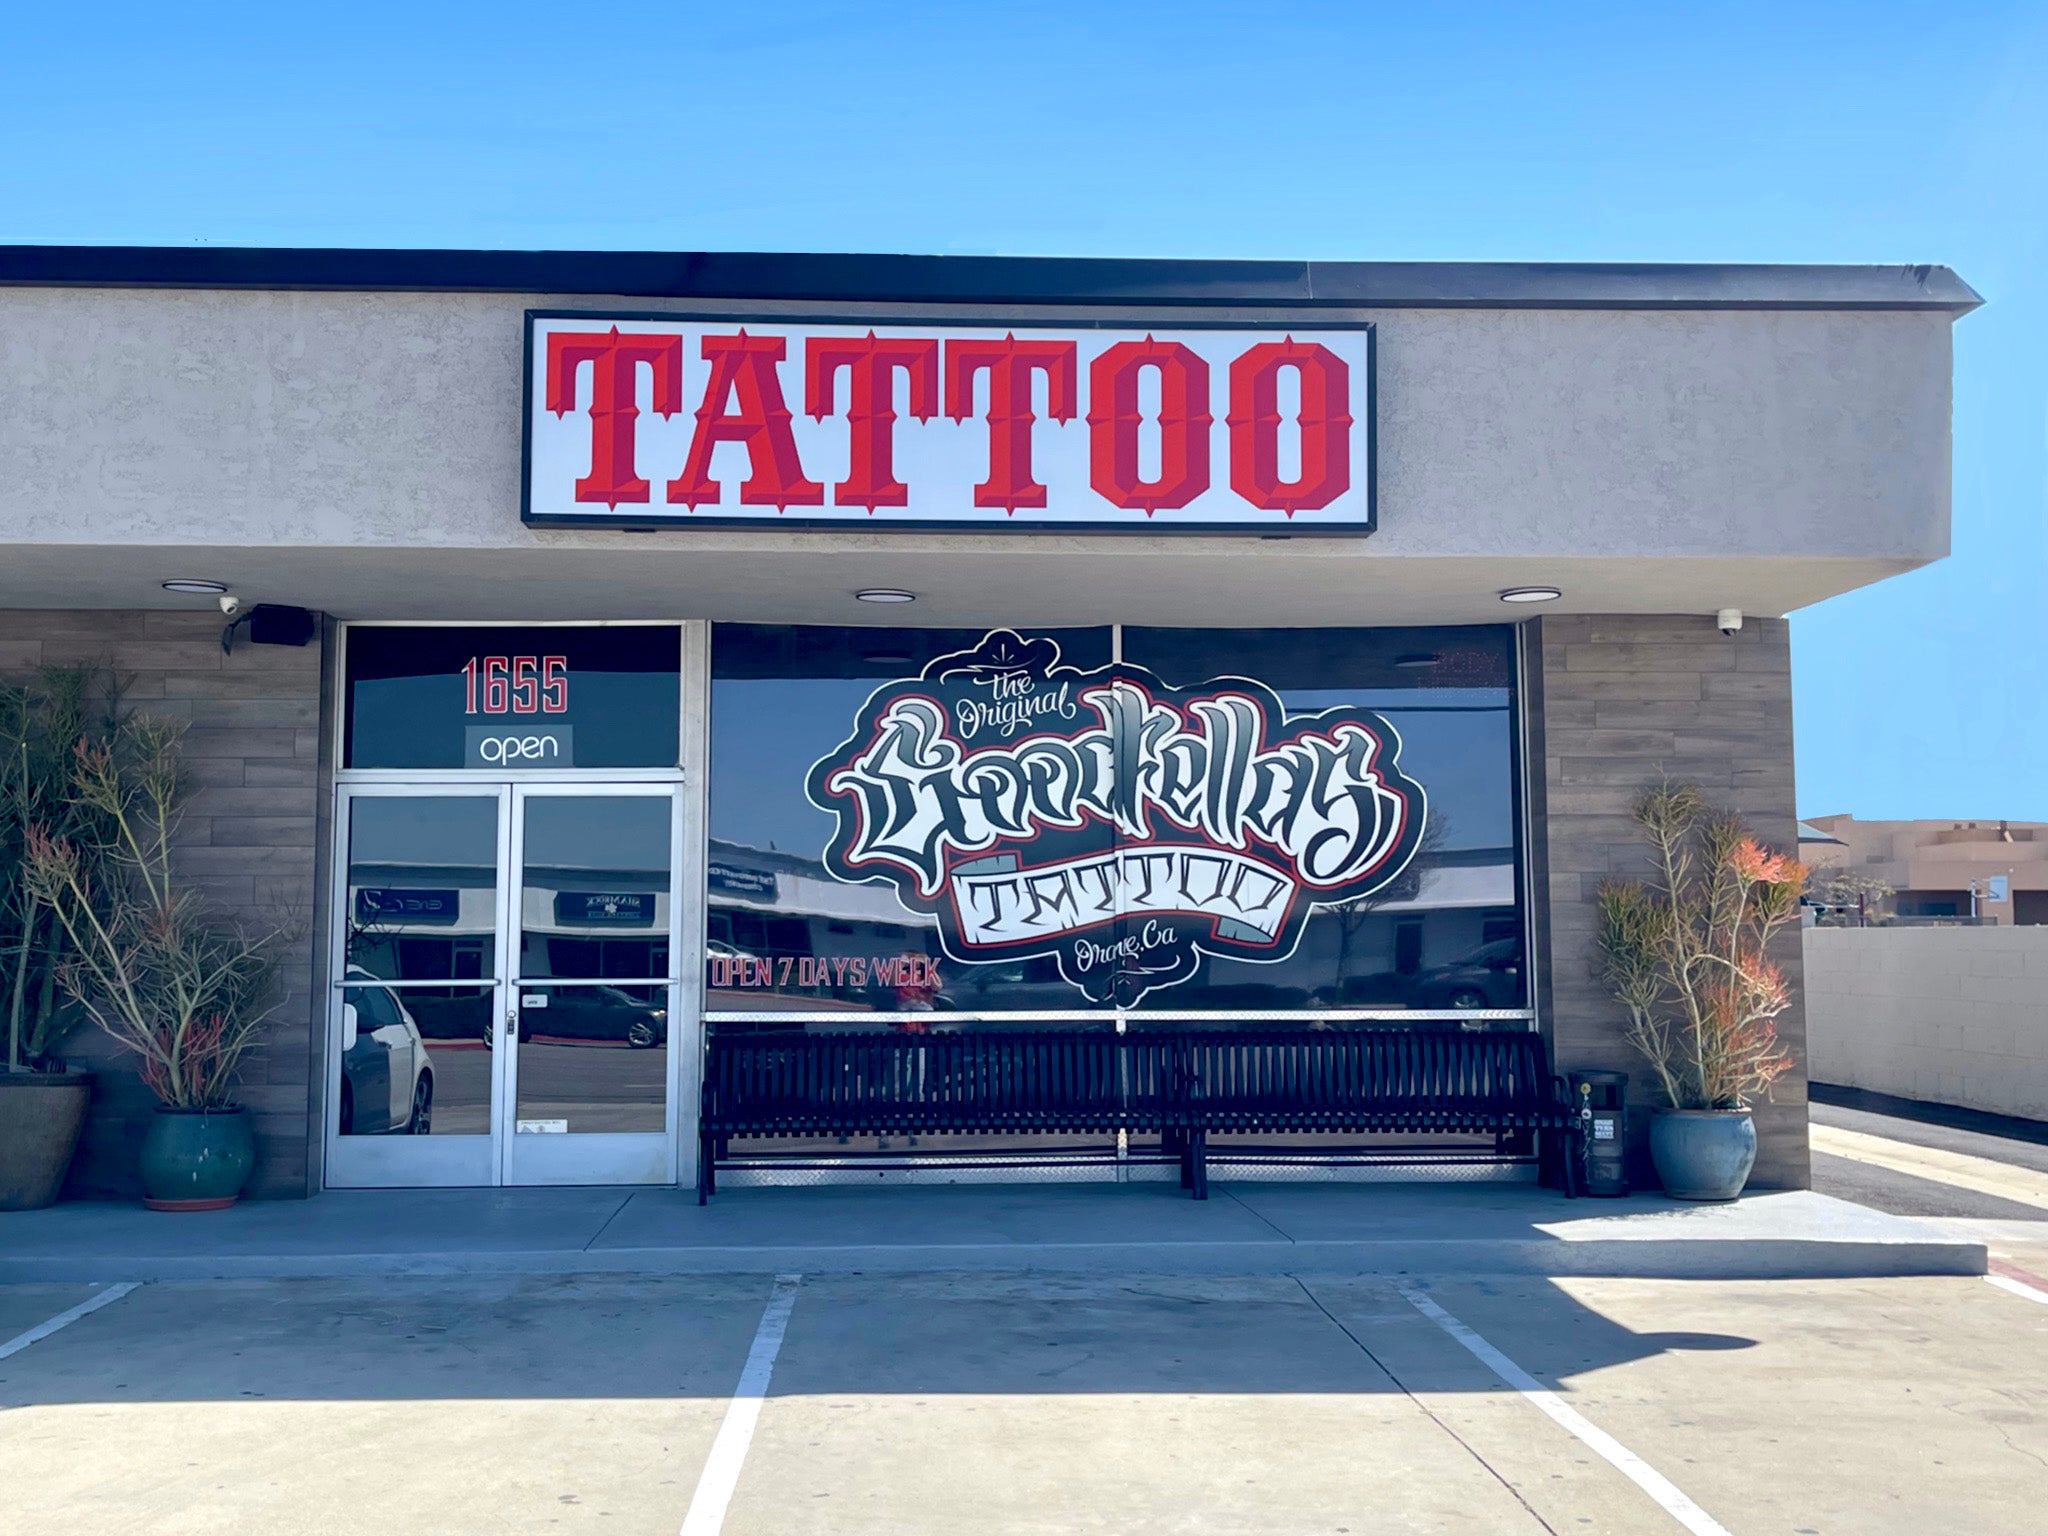 Graceland Tattoo: The Hudson Valley's Go-To Tattoo and Piercing Shop |  Branded Content | Beauty & Fashion | Hudson Valley | Chronogram Magazine